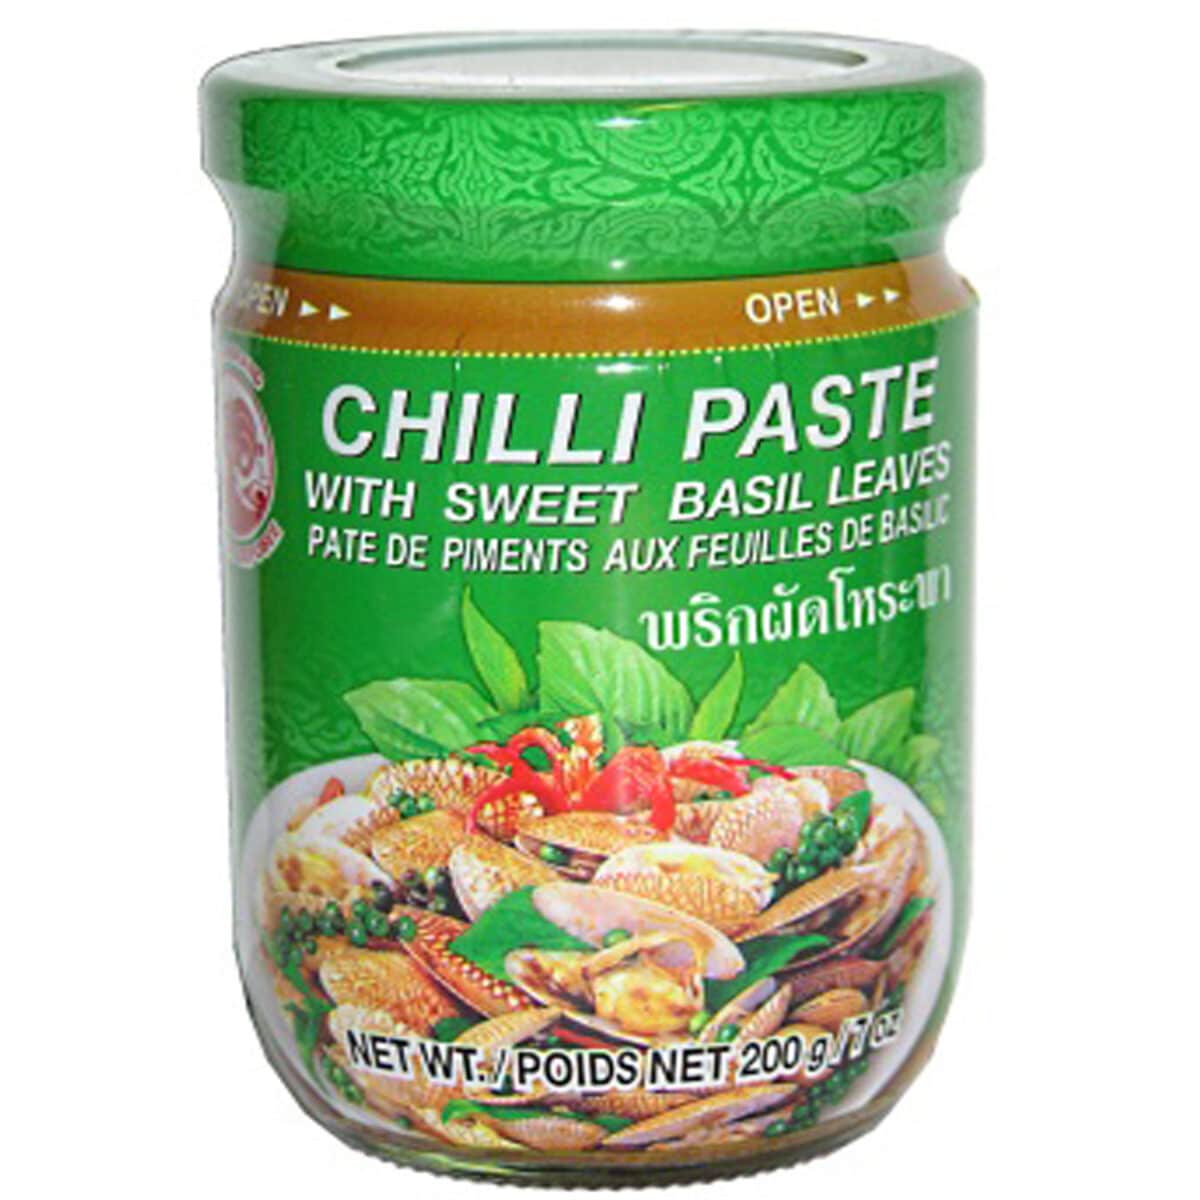 Cock-Chili-Paste-with sweet basil